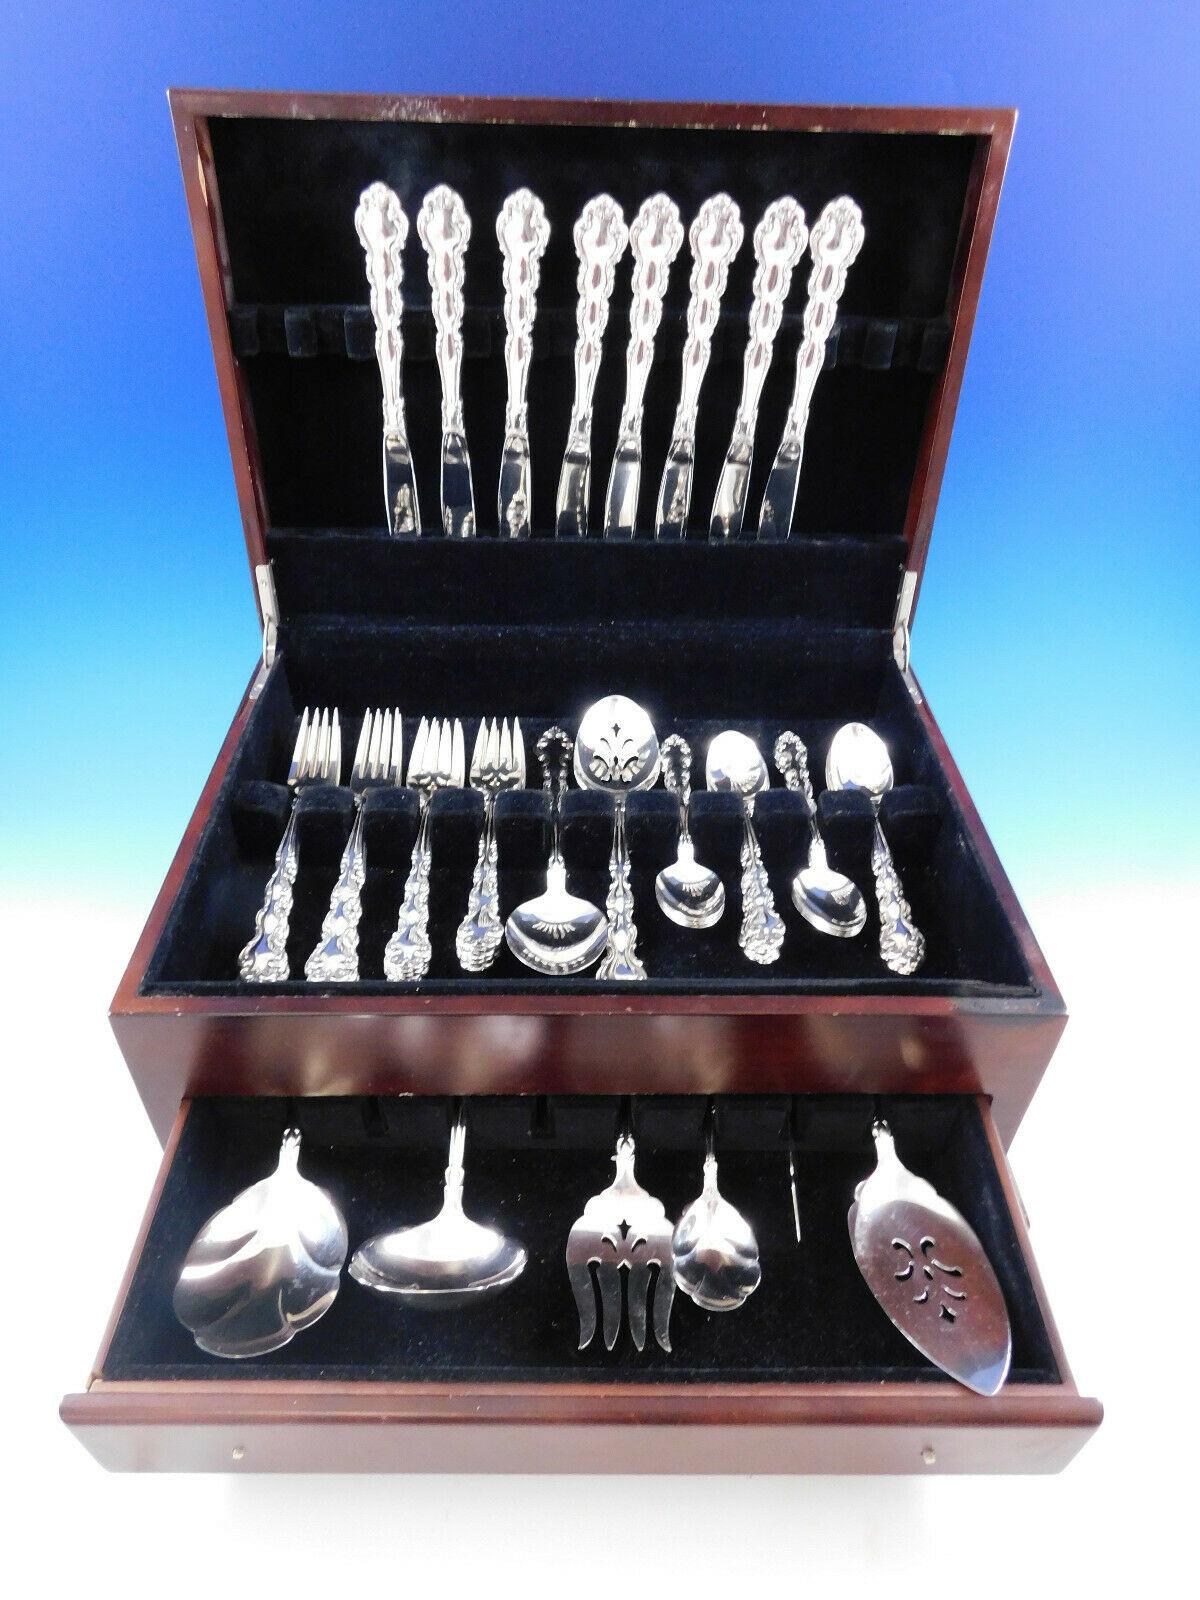 Modern Baroque by Community / Oneida Silverplate estate Flatware set - 48 Pieces. This set includes:

8 Knives, 9